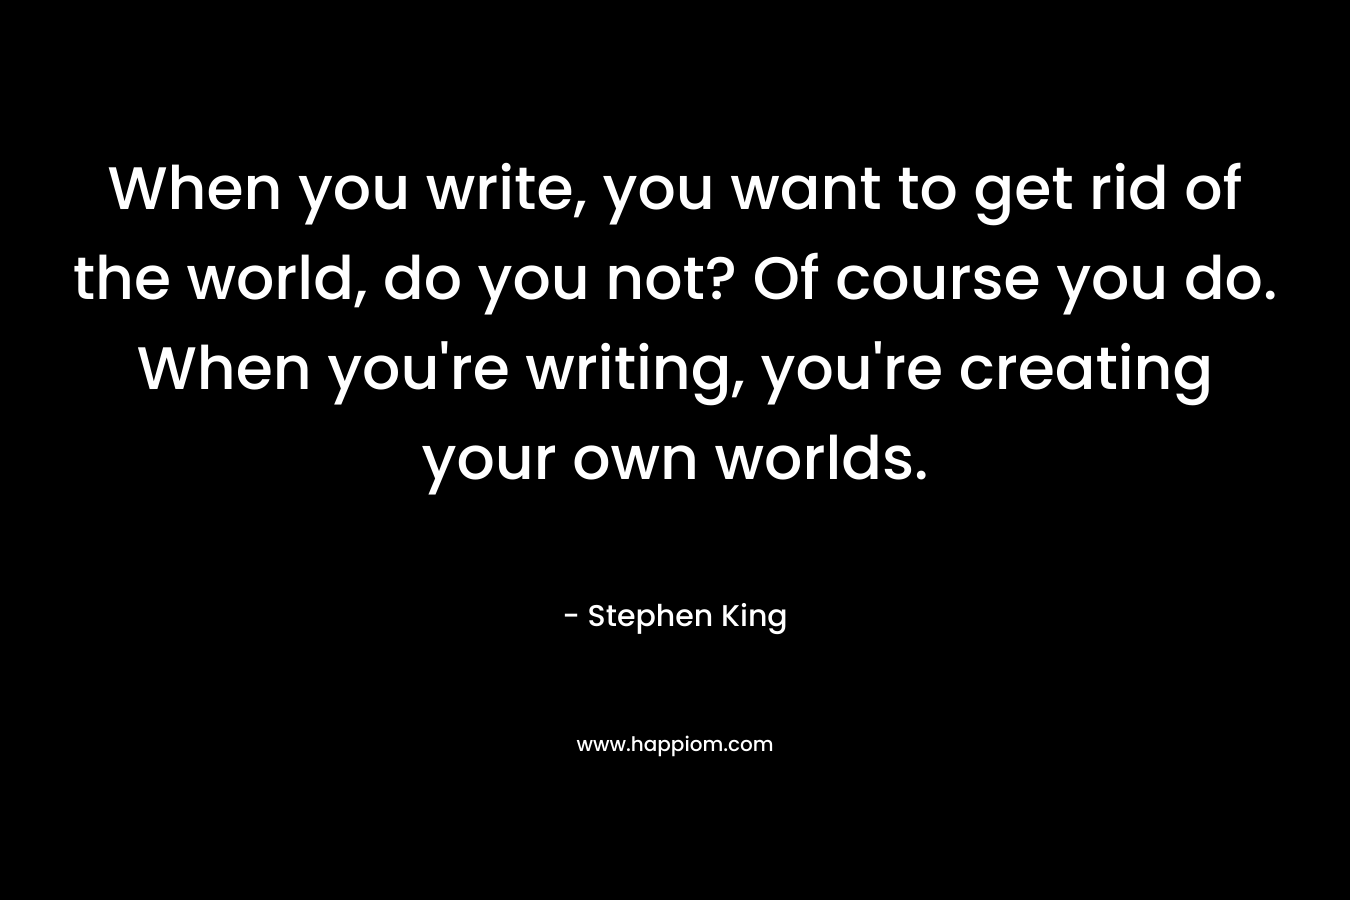 When you write, you want to get rid of the world, do you not? Of course you do. When you’re writing, you’re creating your own worlds. – Stephen King